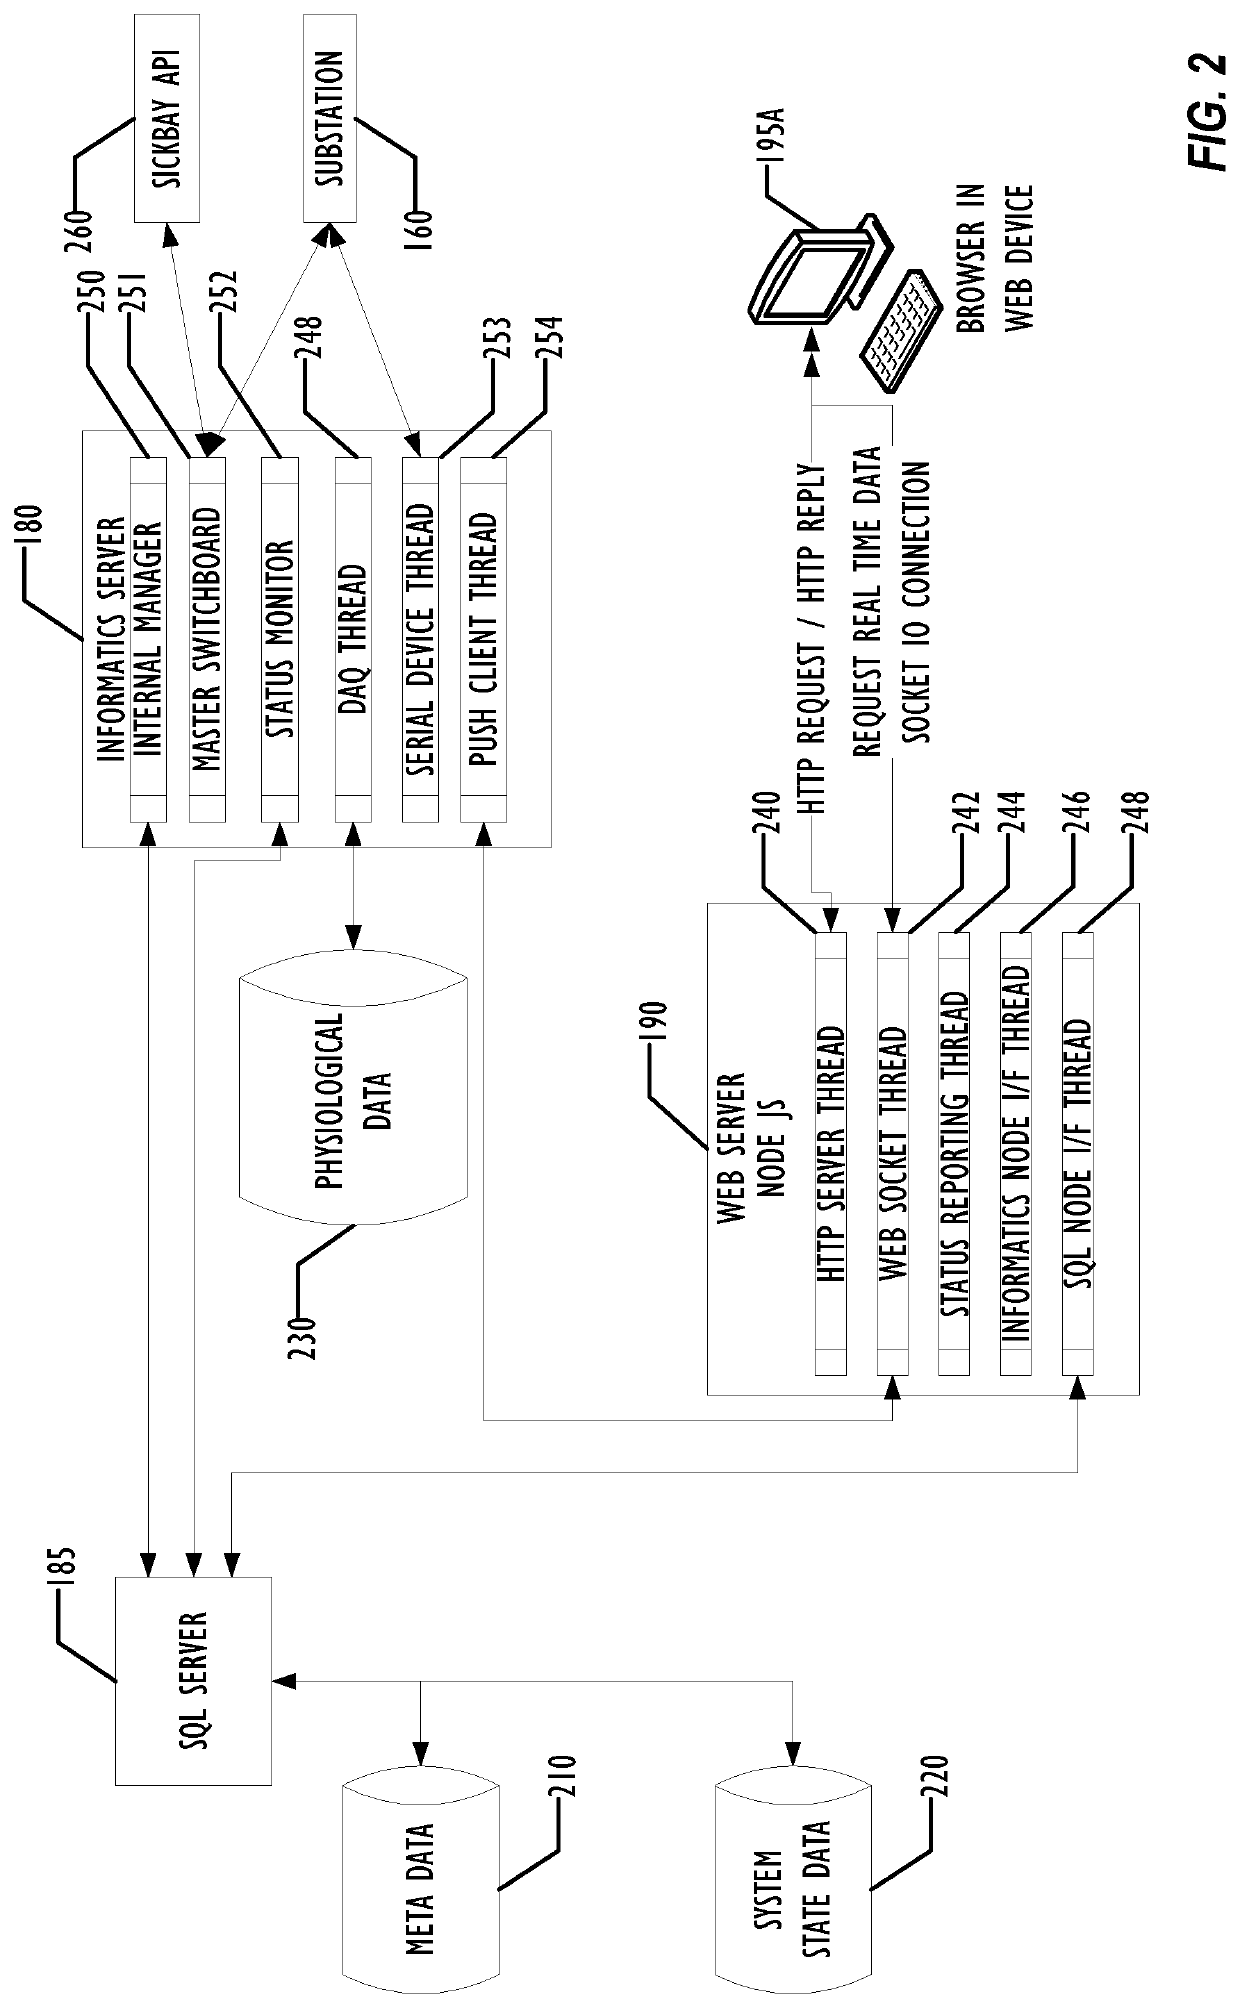 Distributed grid-computing platform for collecting, archiving, and processing arbitrary data in a healthcare environment